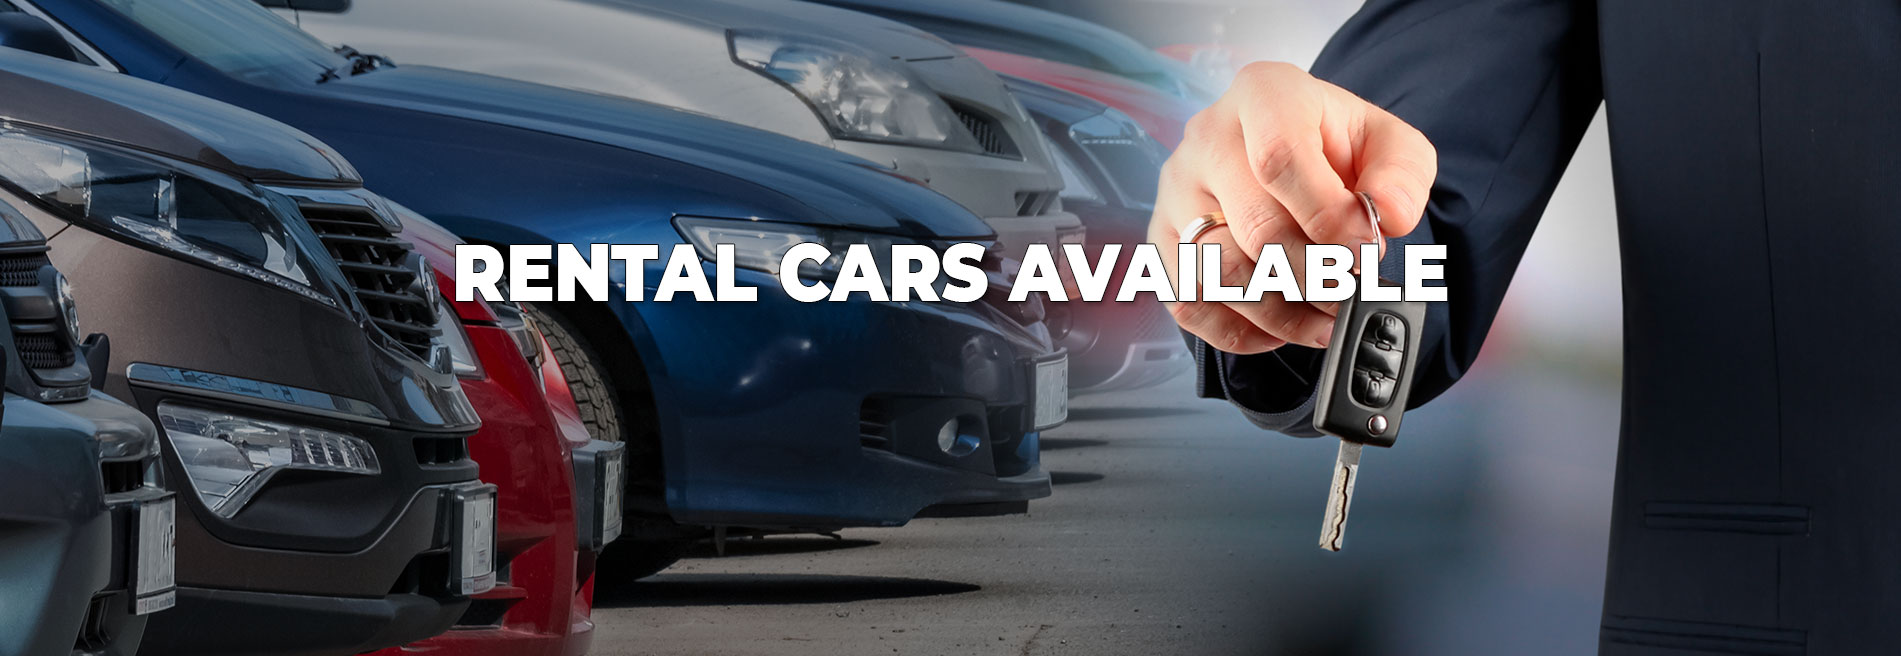 Rental Cars Available